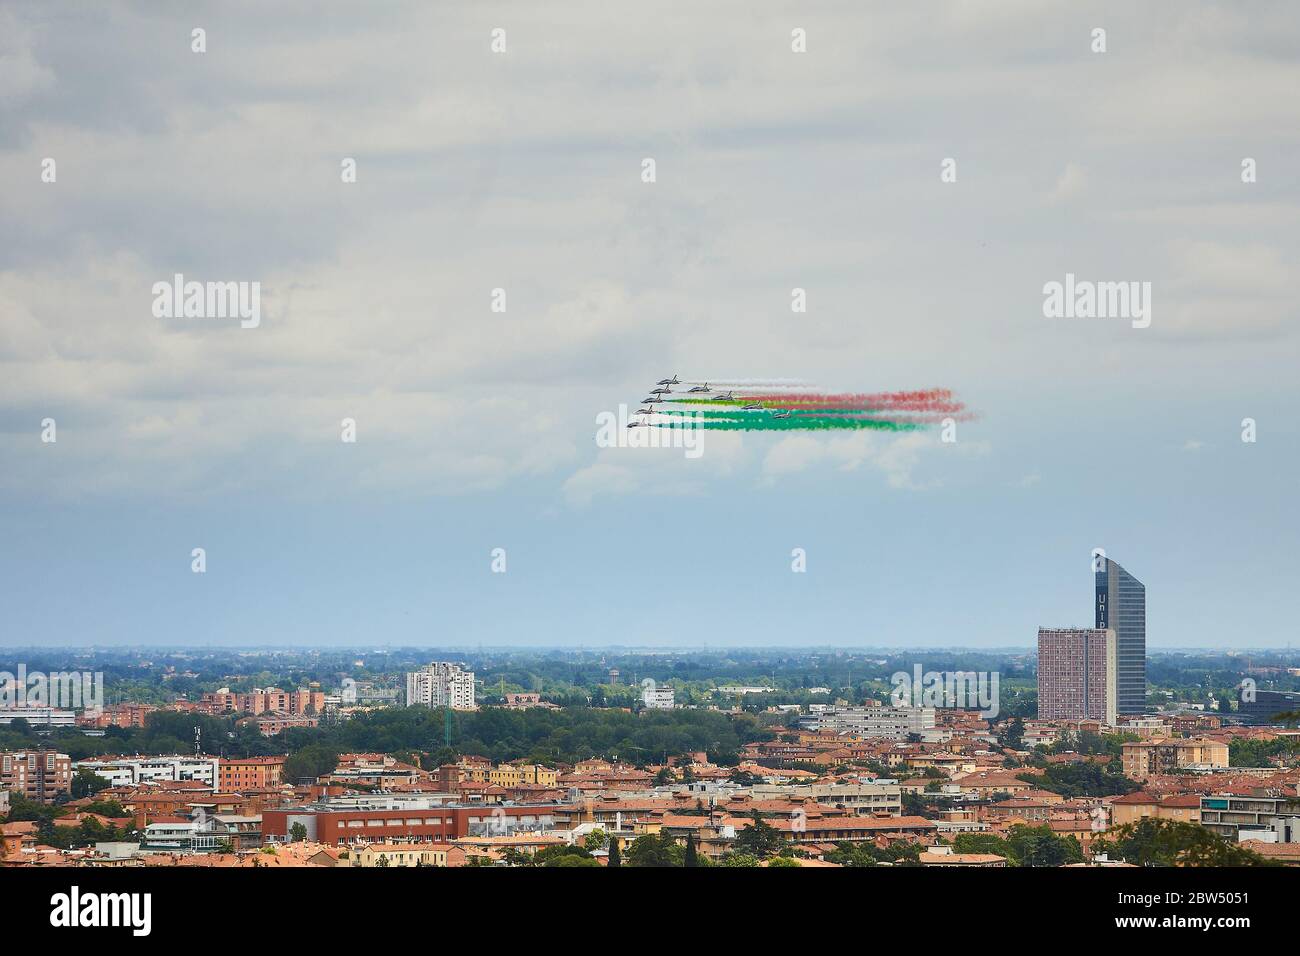 Bologna, Italy. 29th May, 2020. Italy's aerobatic team Frecce Tricolori (Tricolour arrows) fly over Bologna as part of celebrations for the 74th anniversary of the proclamation of the Italian Republic on May 29, 2020 in Bologna, Italy. Credit: Massimiliano Donati/Alamy Live News Stock Photo